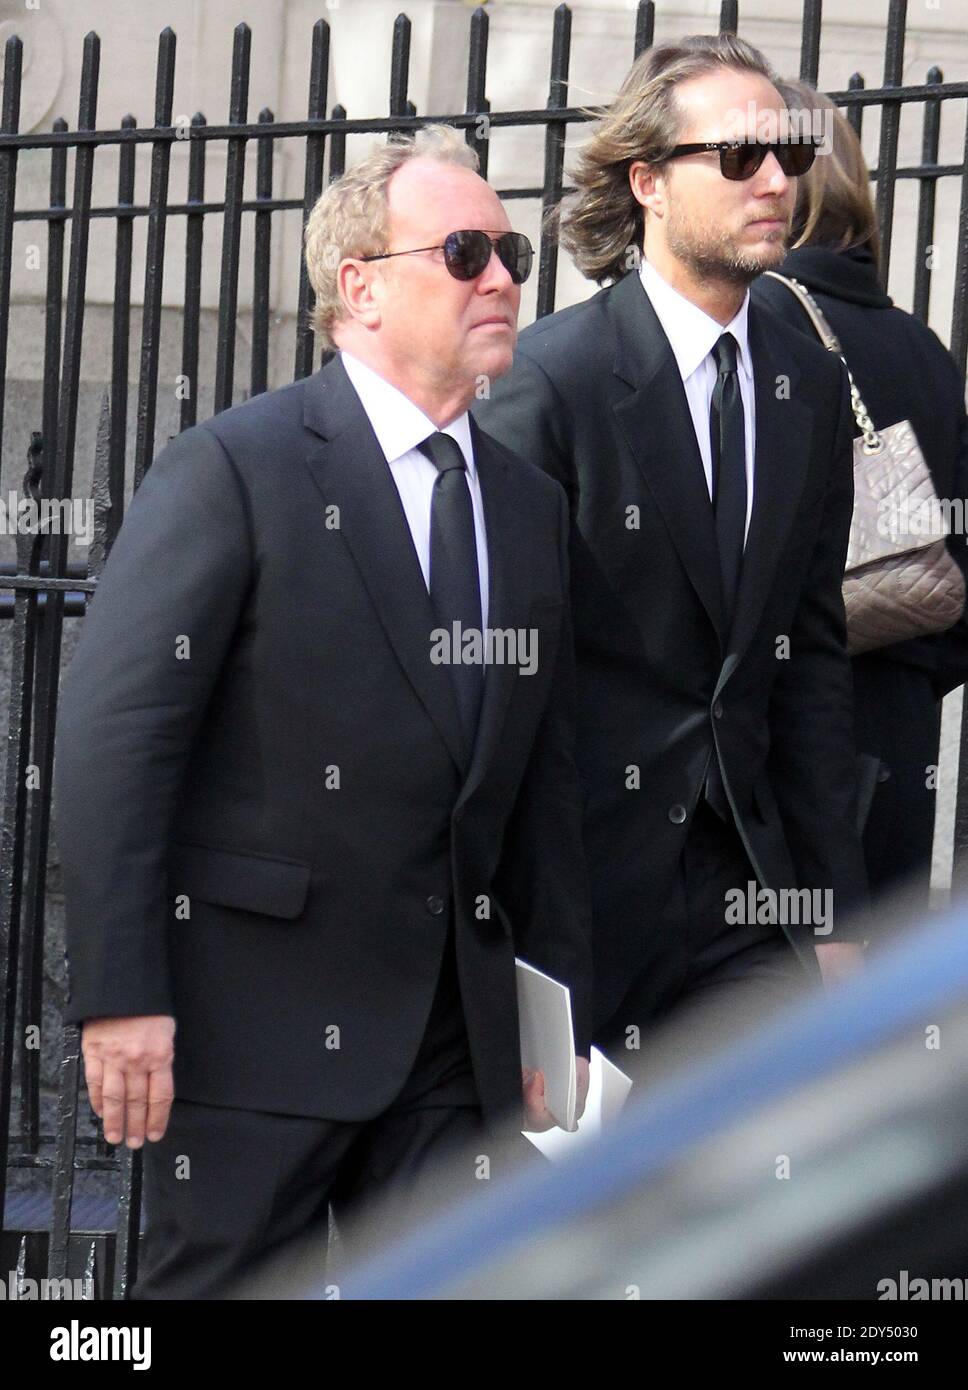 Michael Kors and his husband Lance LePere attend the funeral service of  Oscar De La Rentta at the Church of St. Ignatius Loyola at Park Avenue in  Manhattan, New York City, NY,